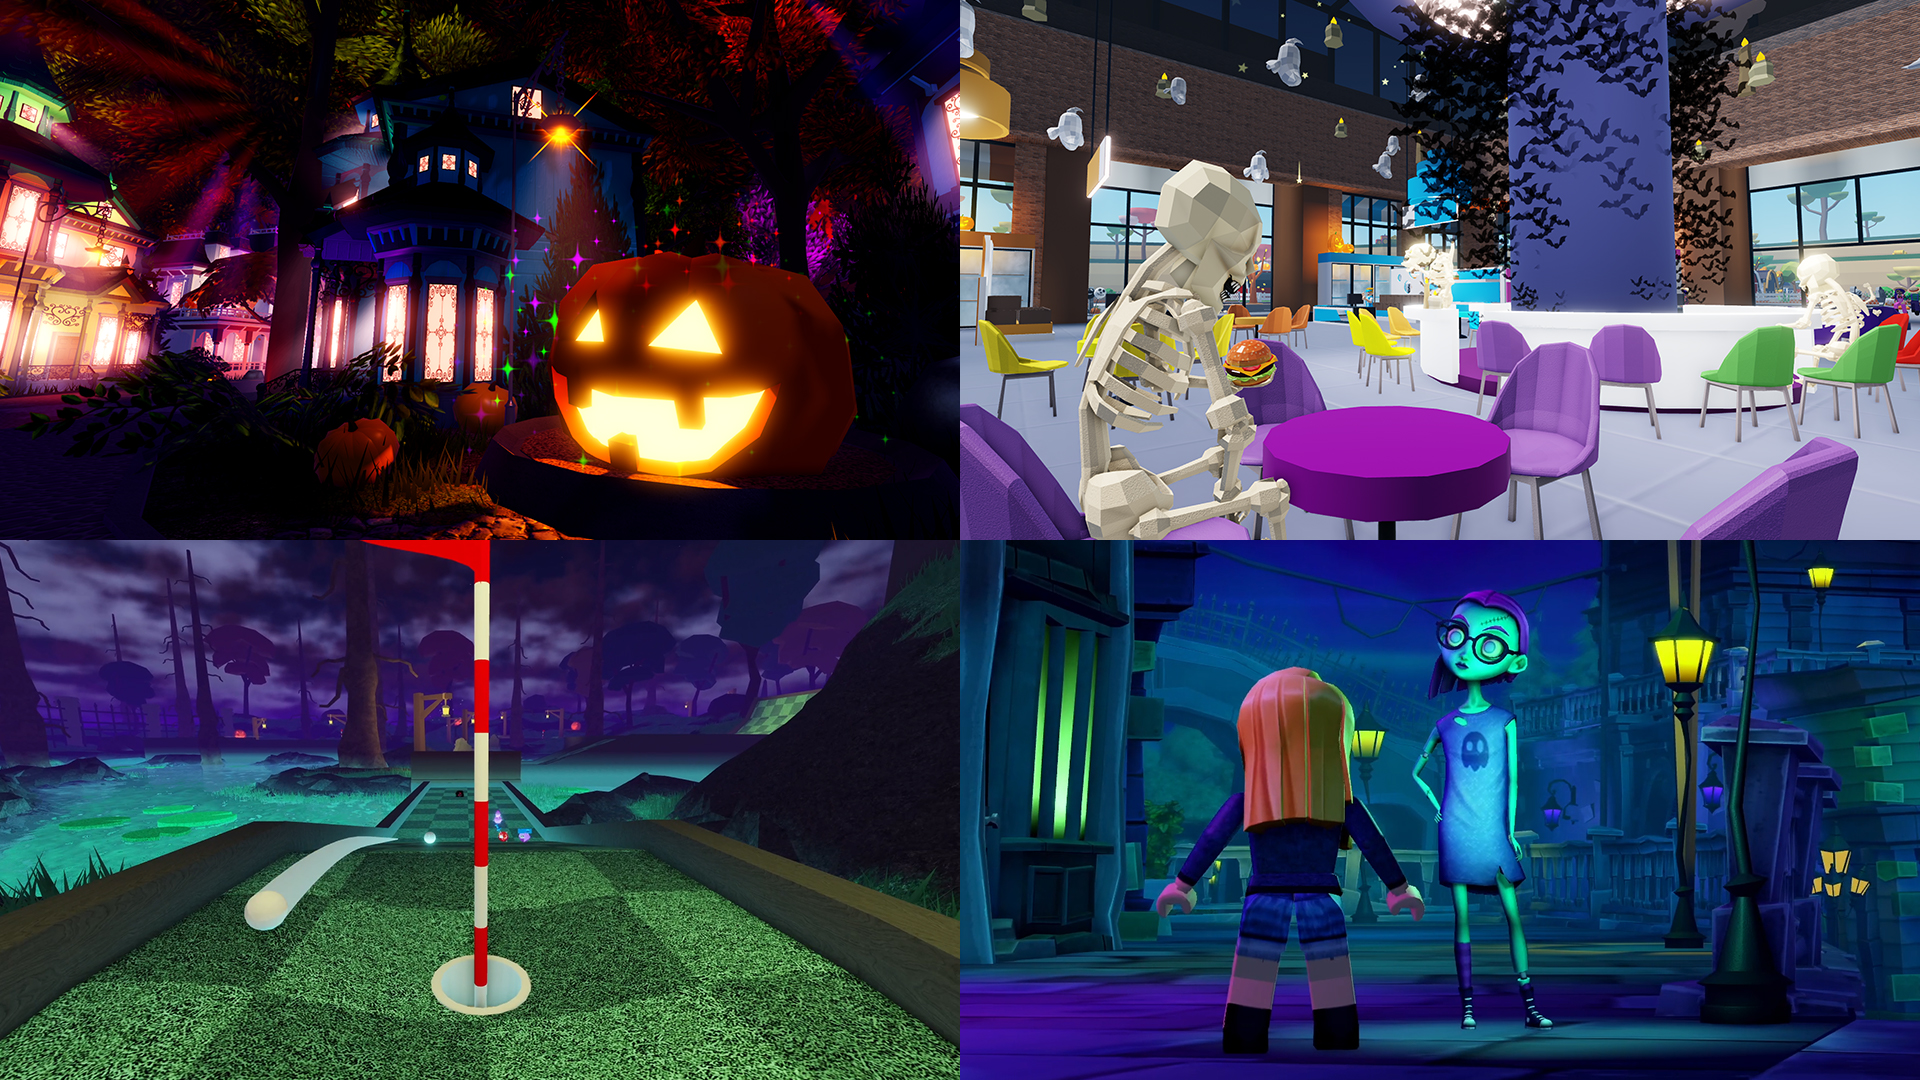 Robloxians Beware: the Hallow's Eve Event is Now on Xbox One - Xbox Wire